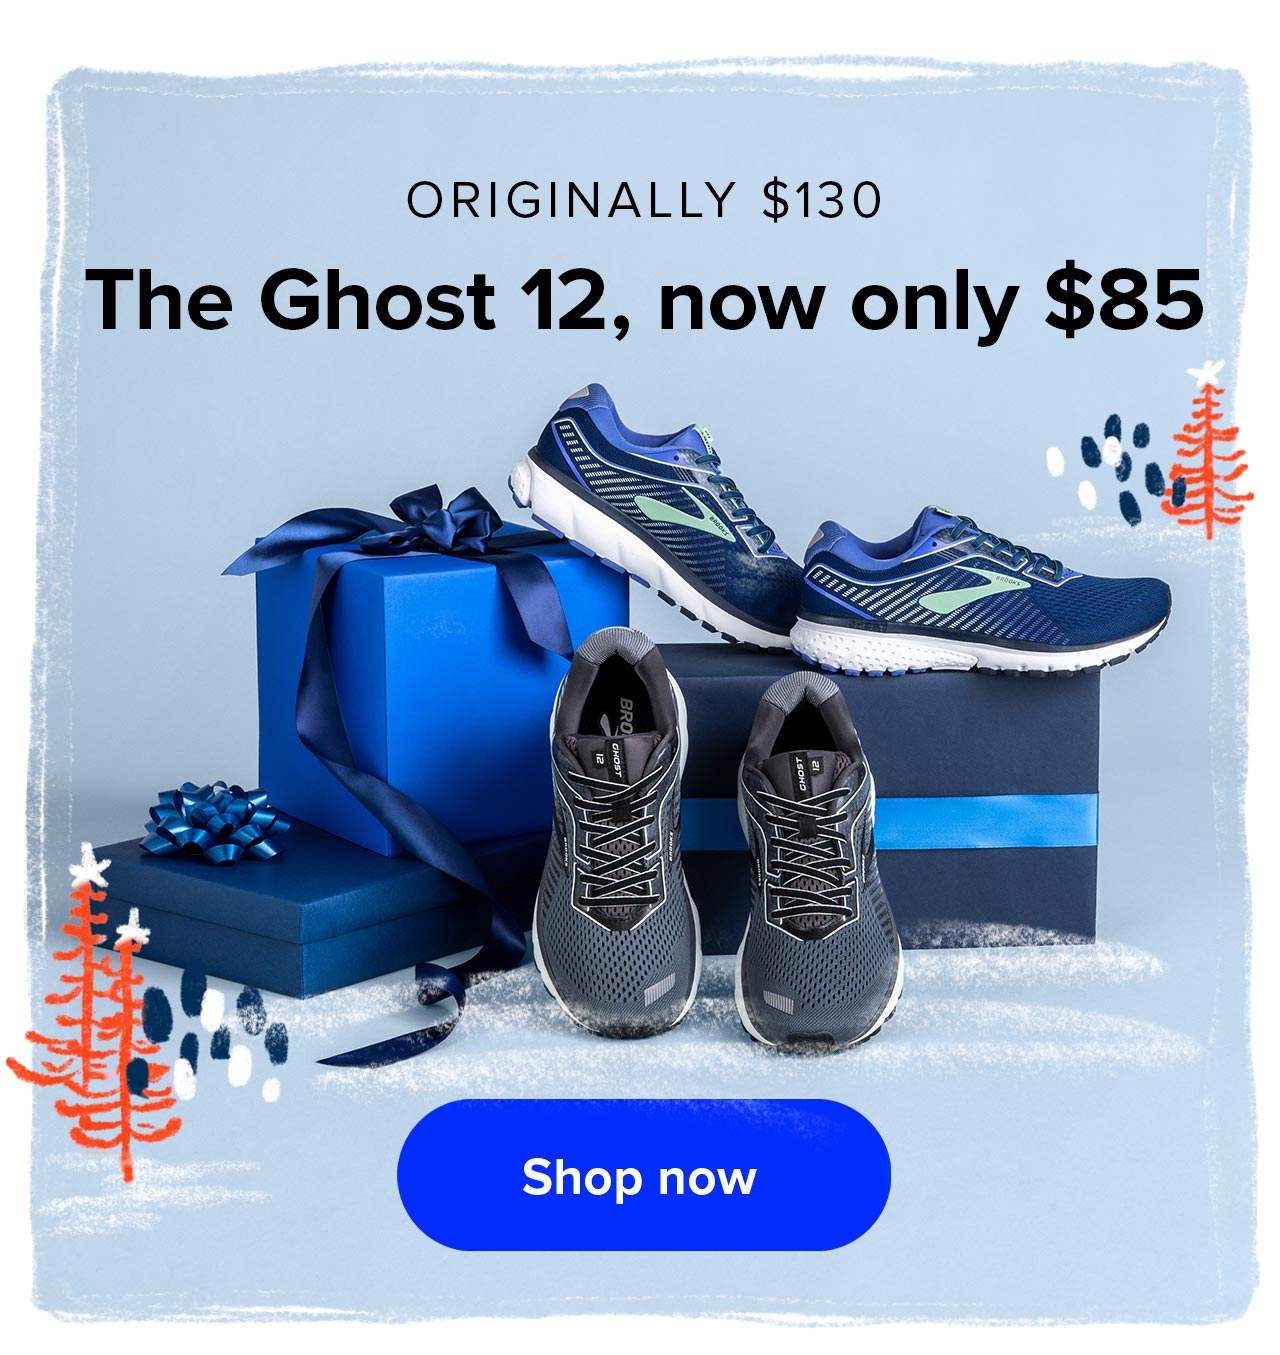 The Ghost 12, now only $85